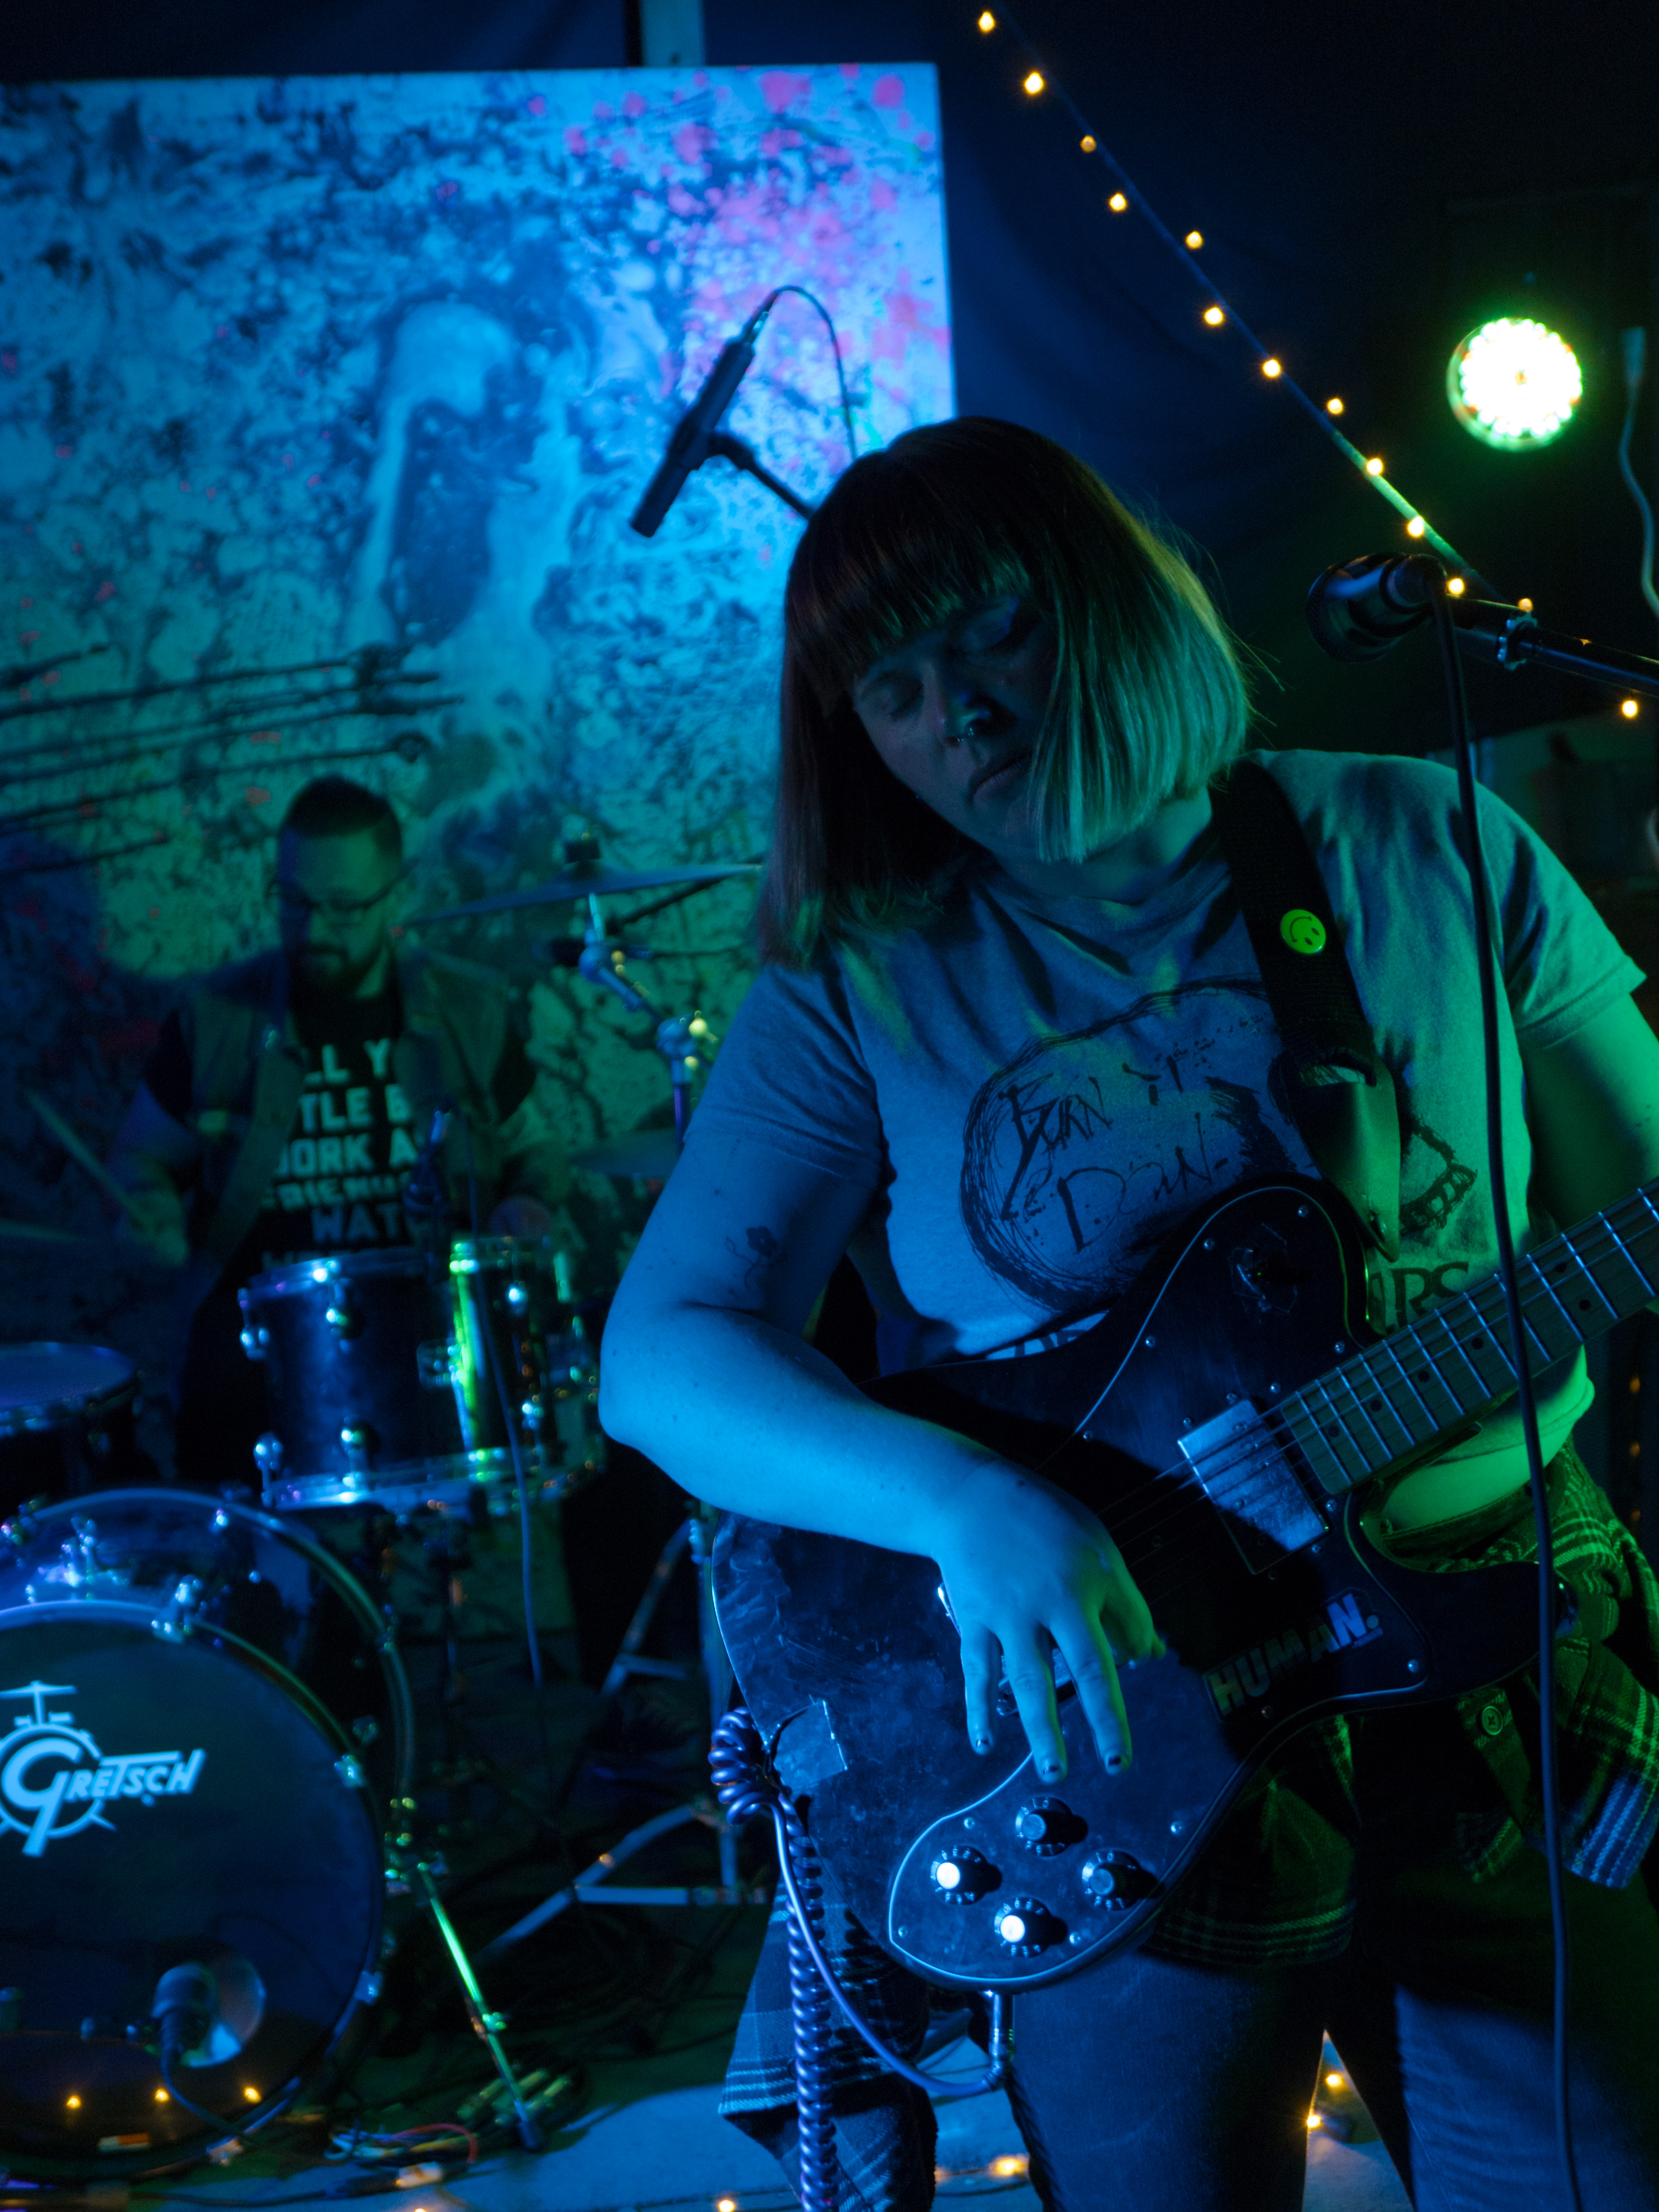 Bridget stands in the front of the stage, holding her guitar. She has a red-blonde bob with a blunt fringe & she looks lost in the music. Andy is visible at the drums behind her.